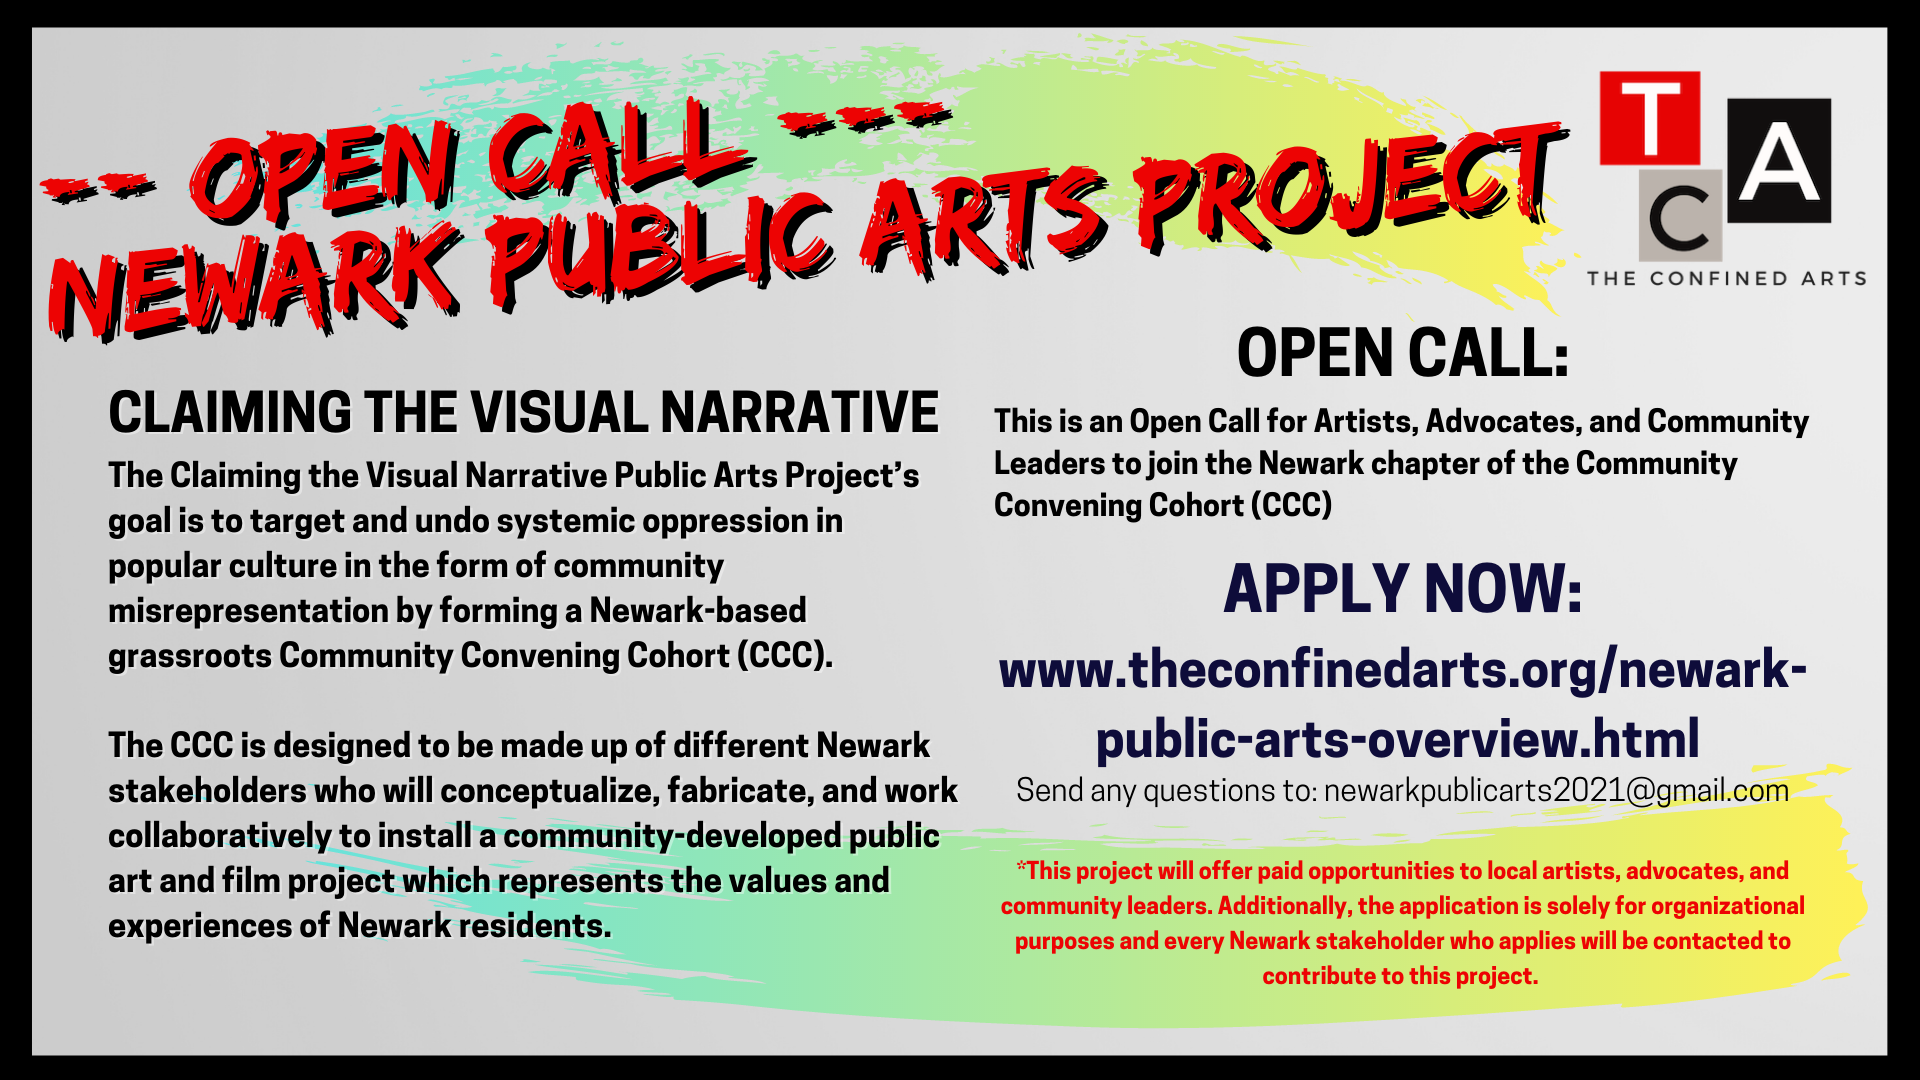 Open Call for Newark Public Arts Project